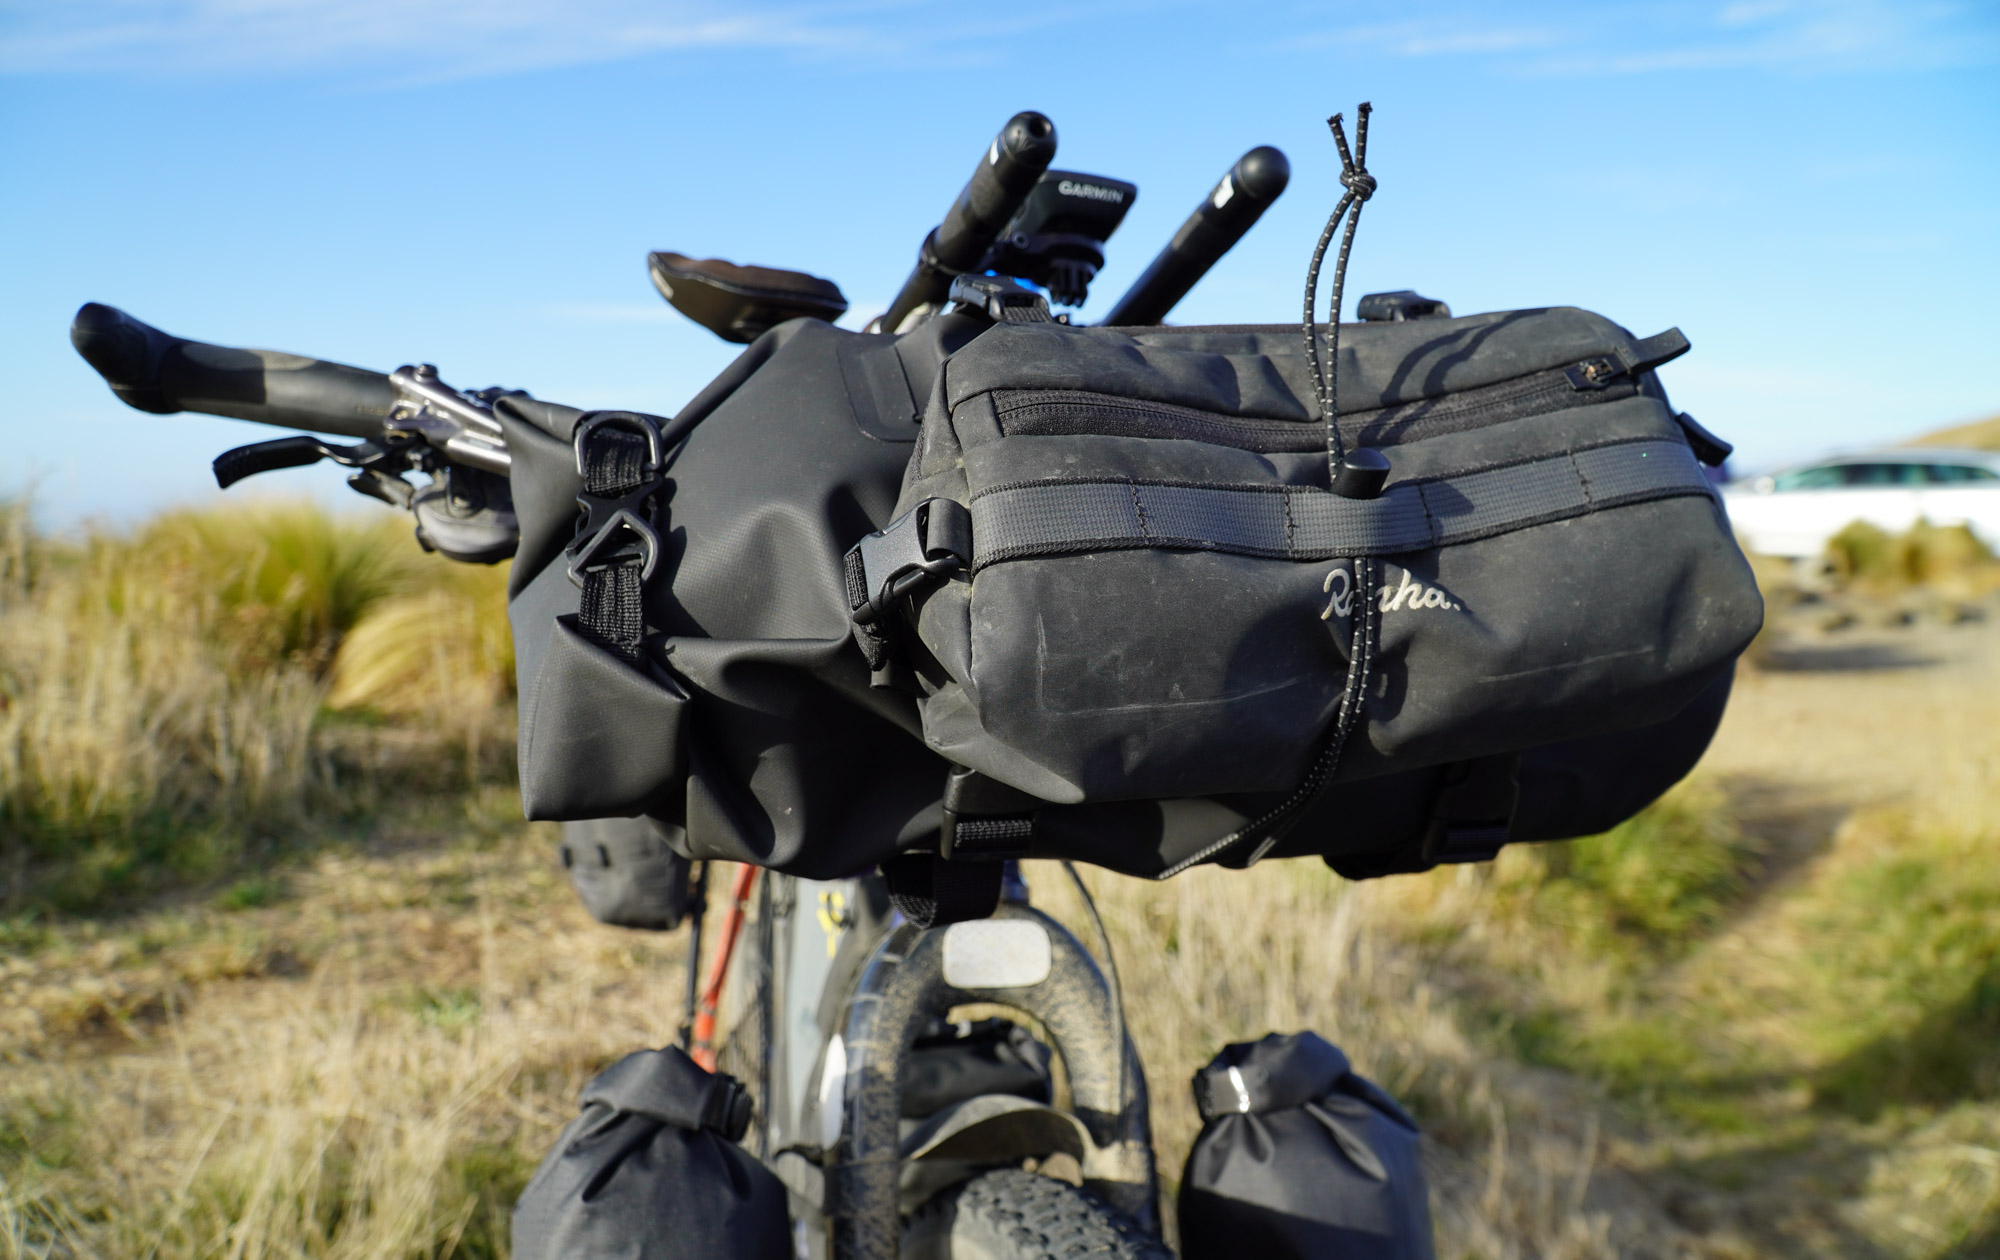 A Rapha handlebar bag is cinched down tight at the front of the bike.